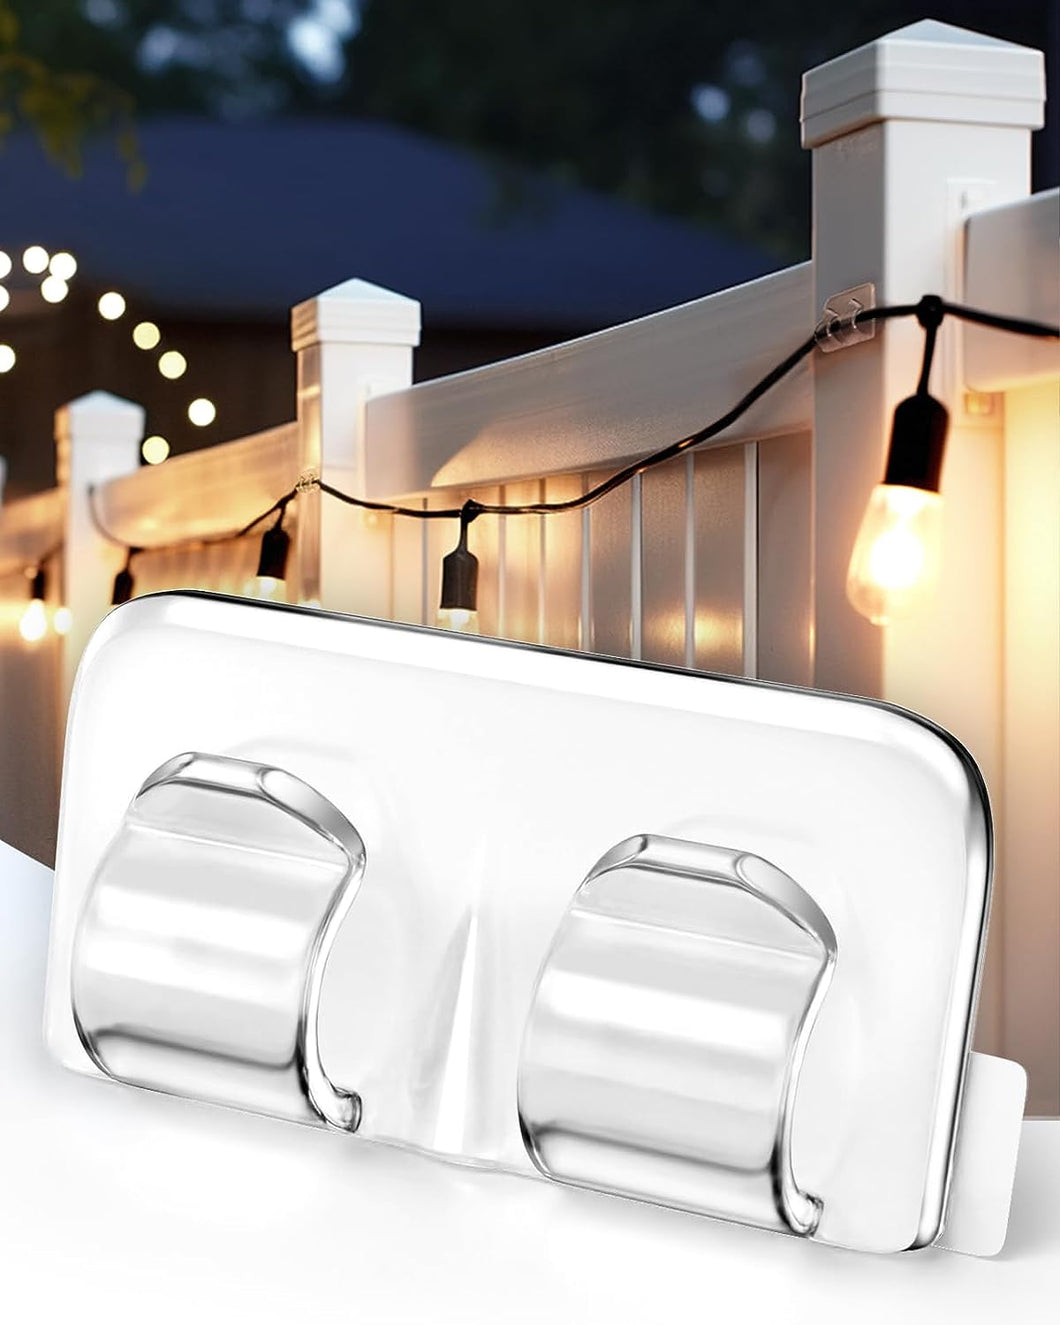 VENETIO Hooks for Outdoor String Lights Clips: 26Pcs Heavy Duty Light Hook with Waterproof Adhesive Strips - Outside Clear Cord Holders for Hanging Christmas Lighting – Outdoors Sticky Clip ➡ OD-00016